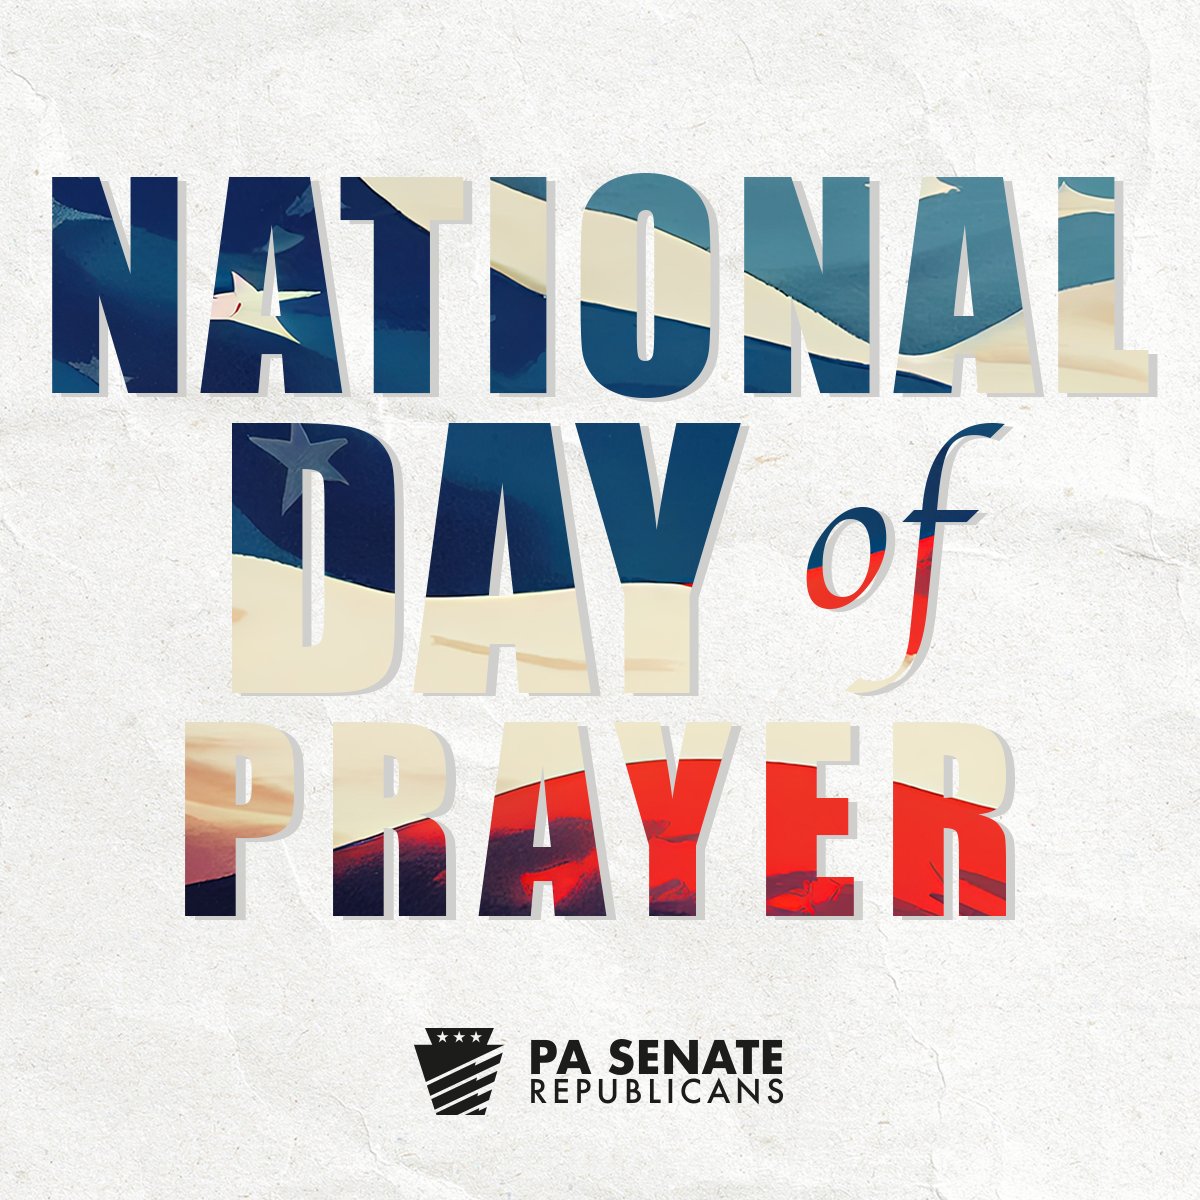 Today is a day for people of all faiths to pray for the nation.